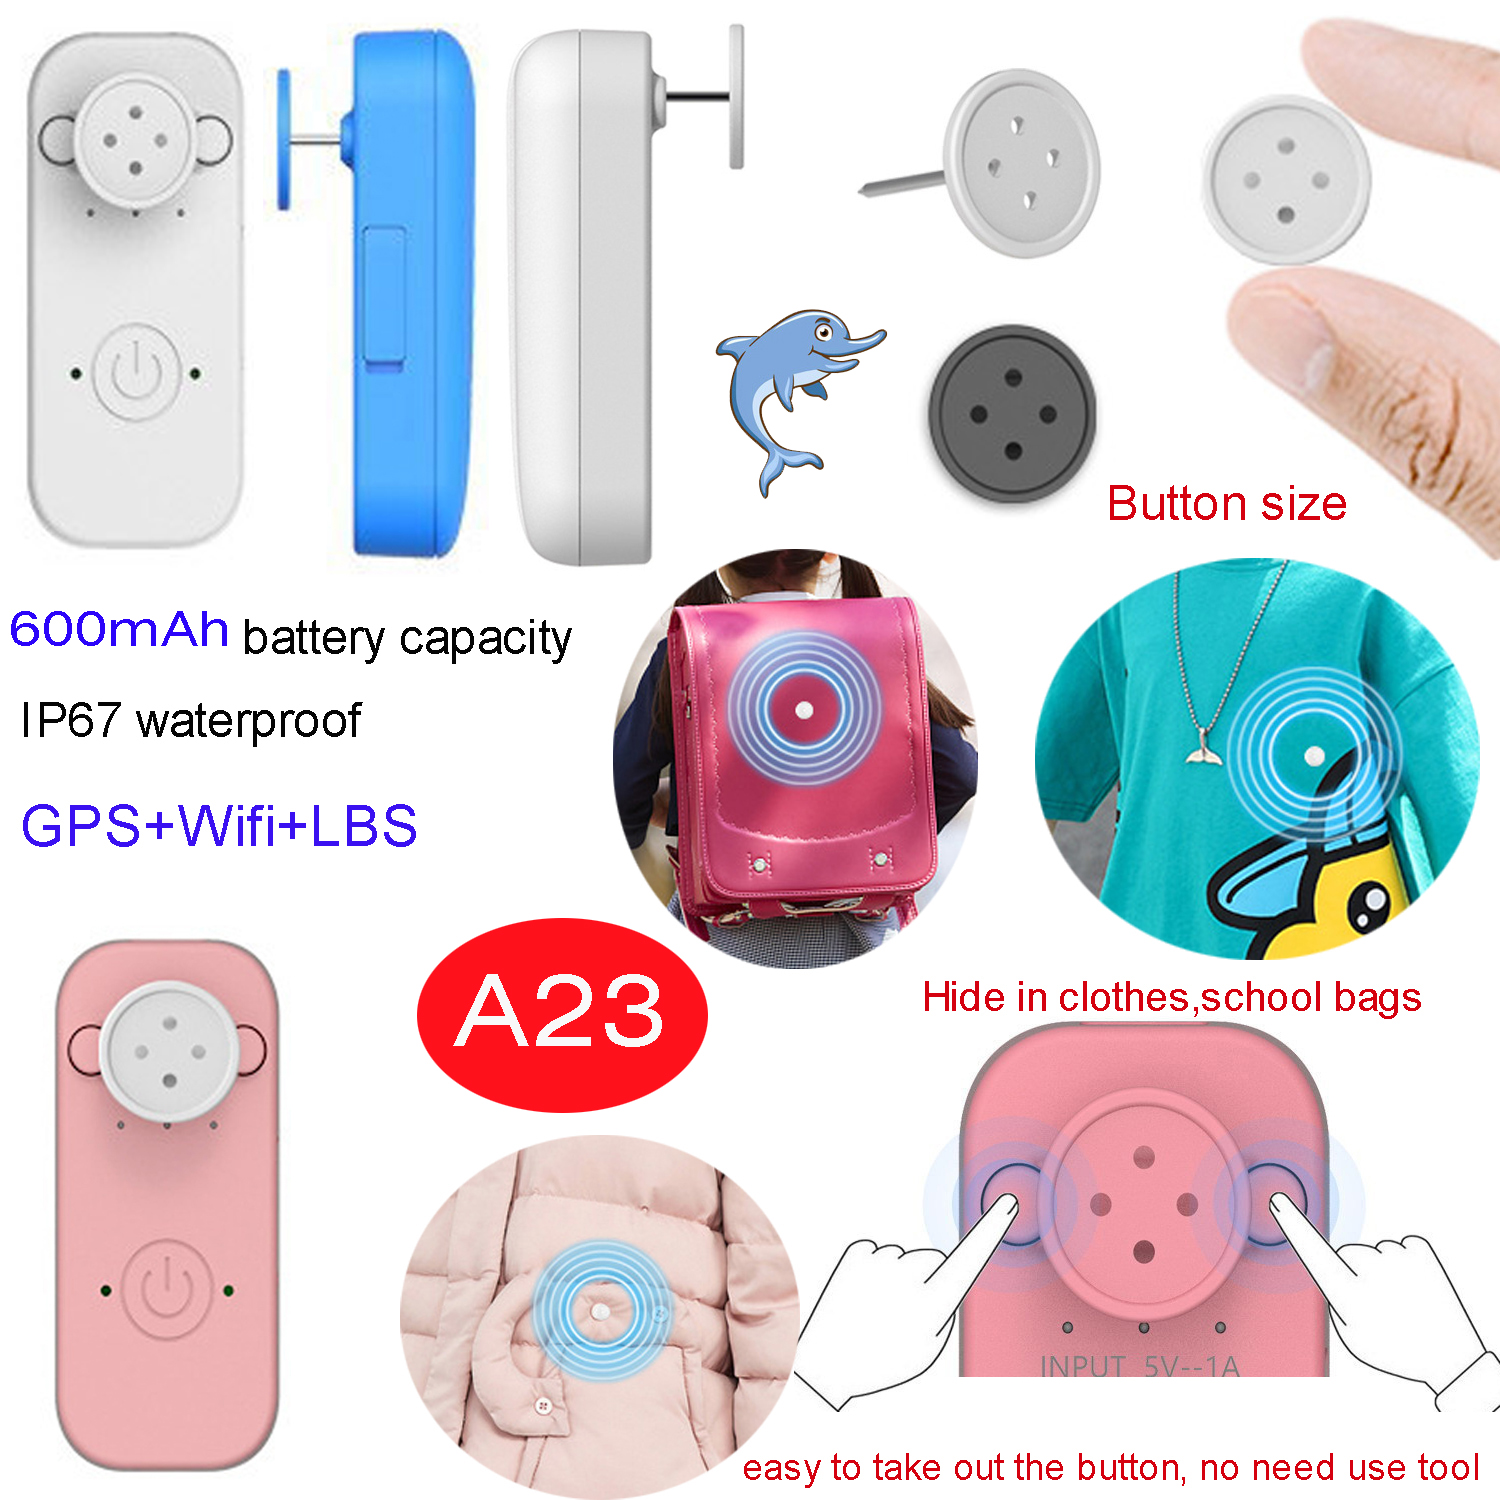 New 2G Hidden Mini GPS Tracker with SOS button for Child